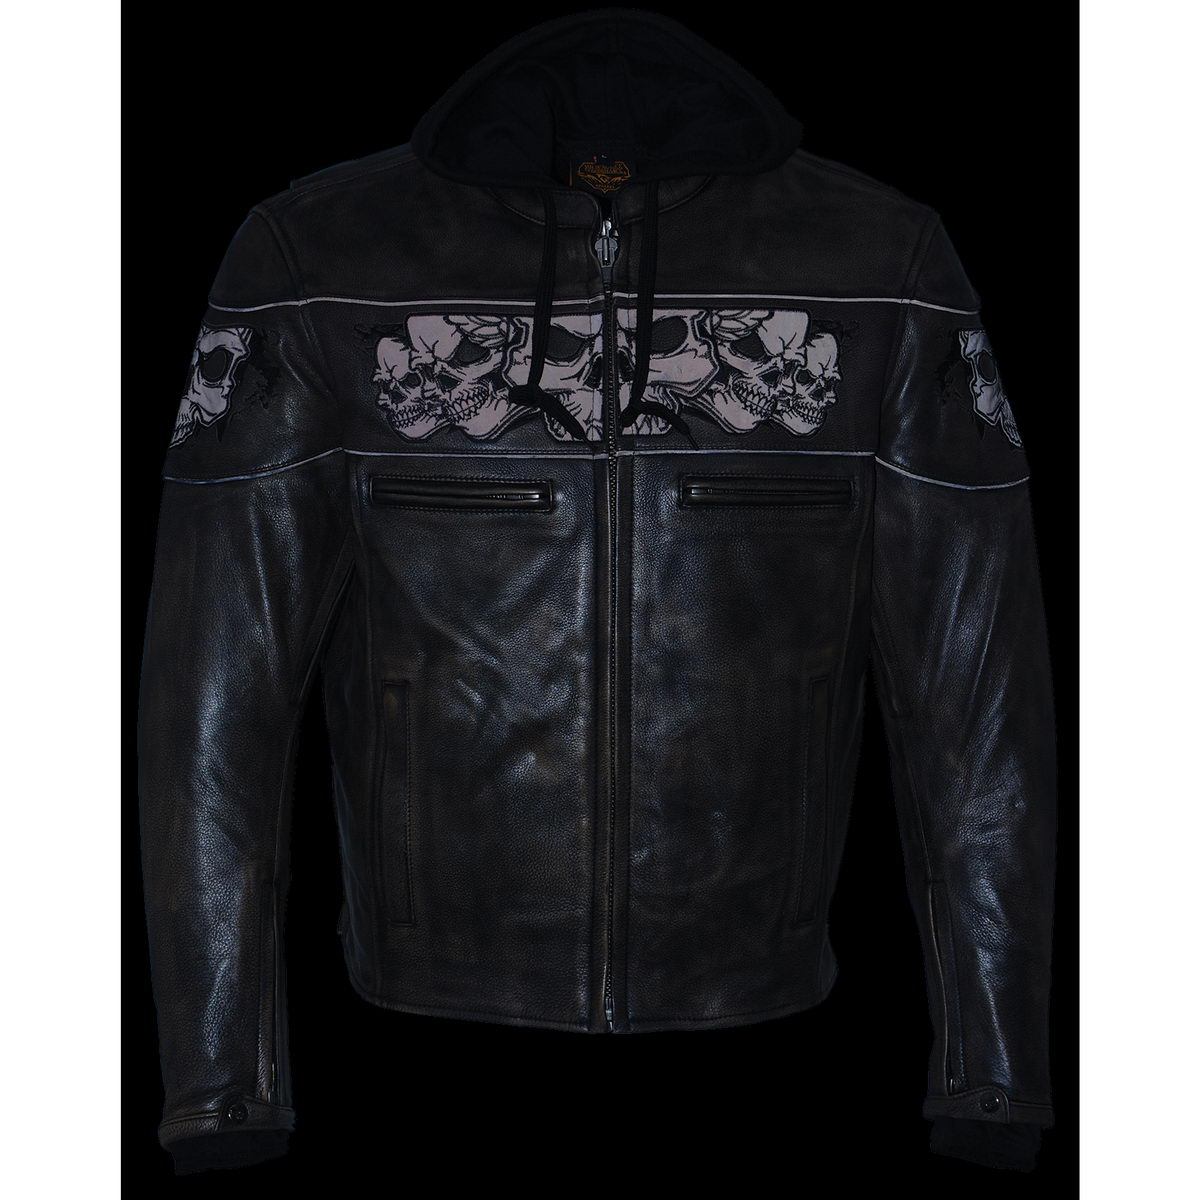 Milwaukee Leather MLM1561 Men's Distress Brown Leather Jacket with Reflective Skulls